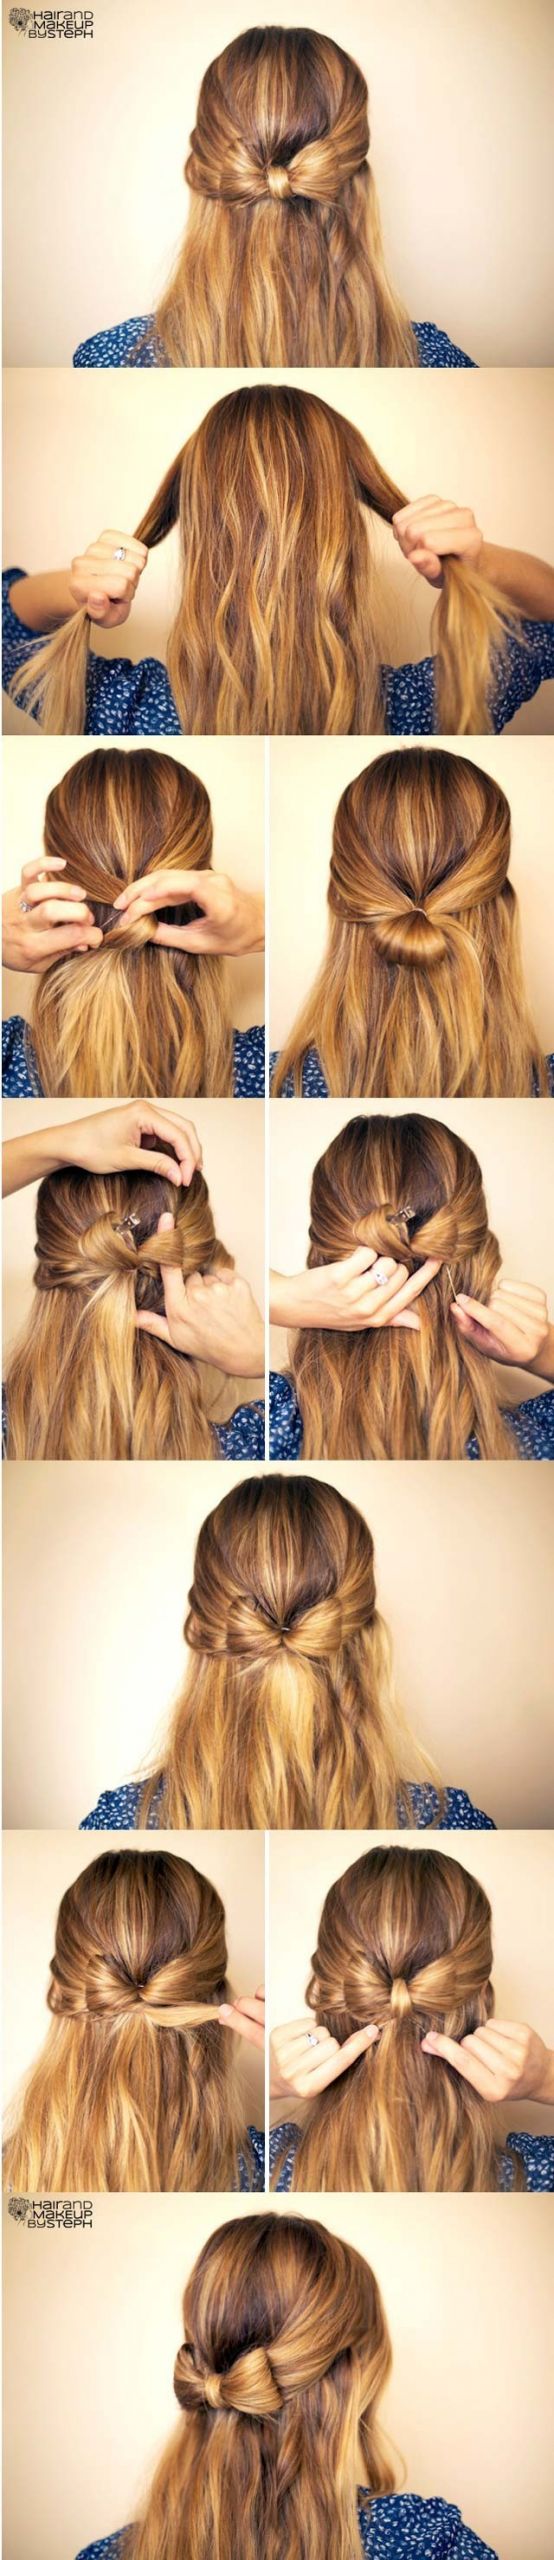 Easy Hairstyles For Medium Hair Step By Step
 15 Cute hairstyles Step by Step Hairstyles for Long Hair